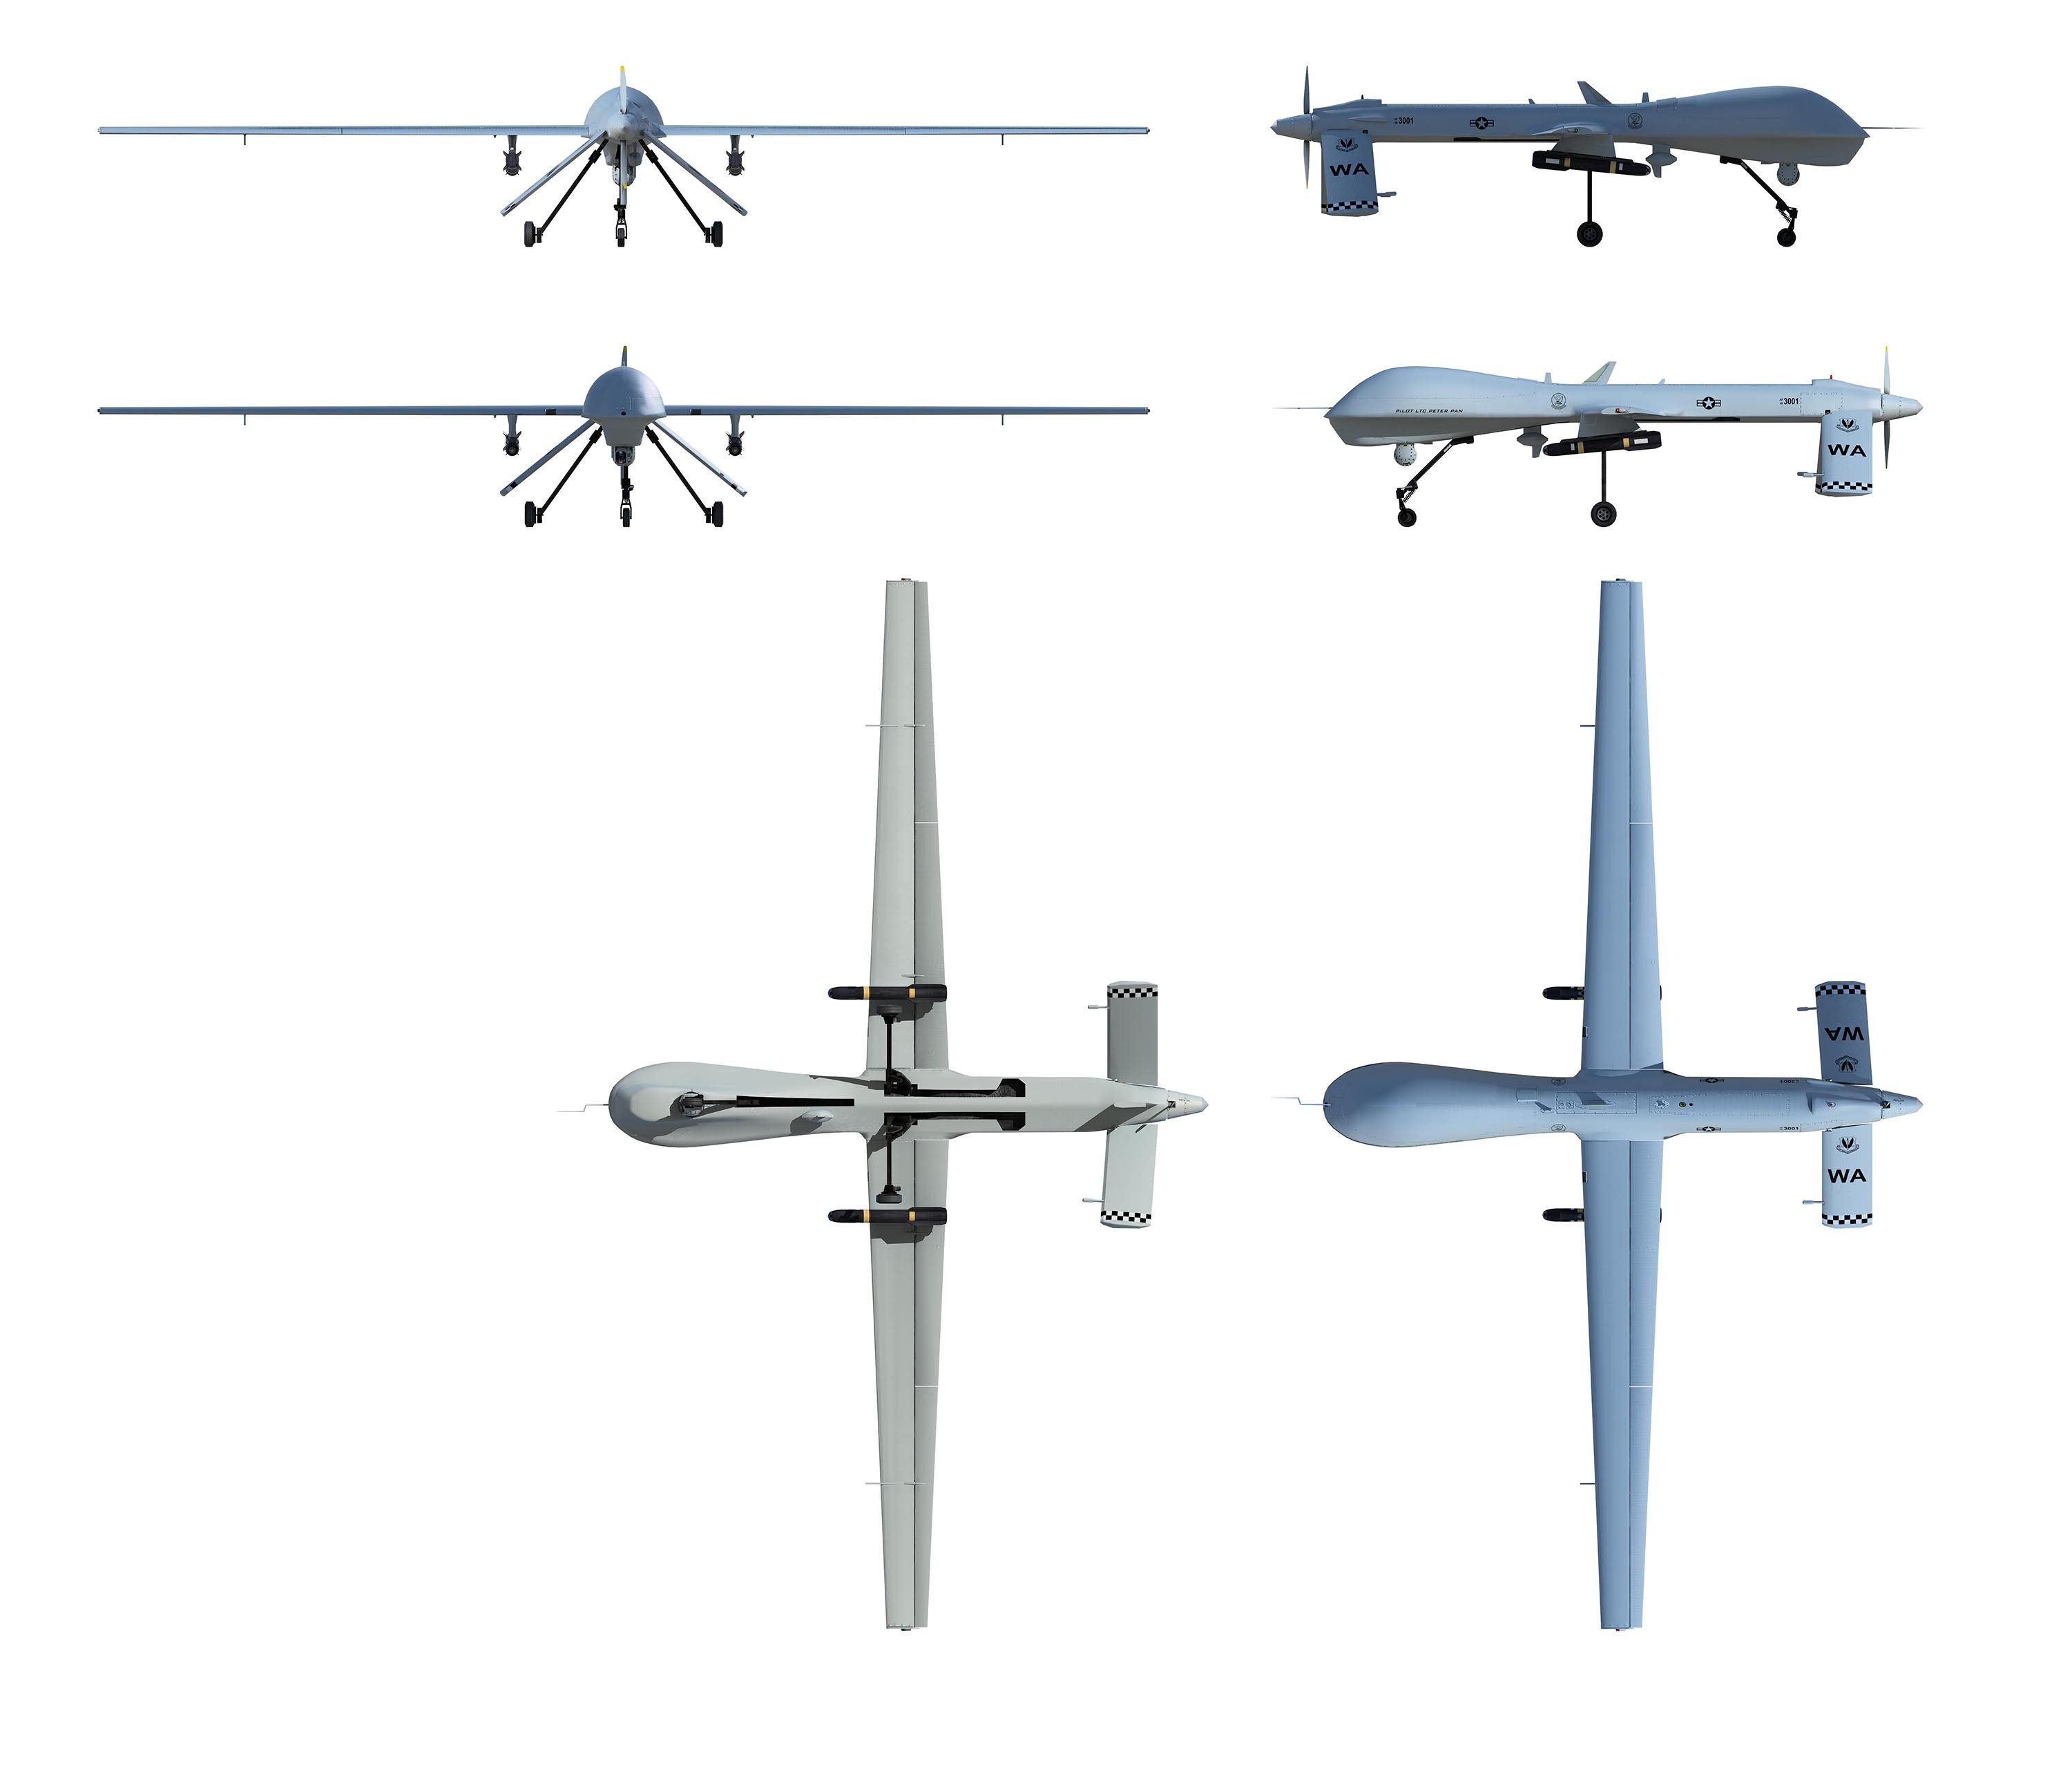 MQ-1 Predator Uav Model Die Cast Drone Model in 1: 72 Scale with All Extra Details Wholesales